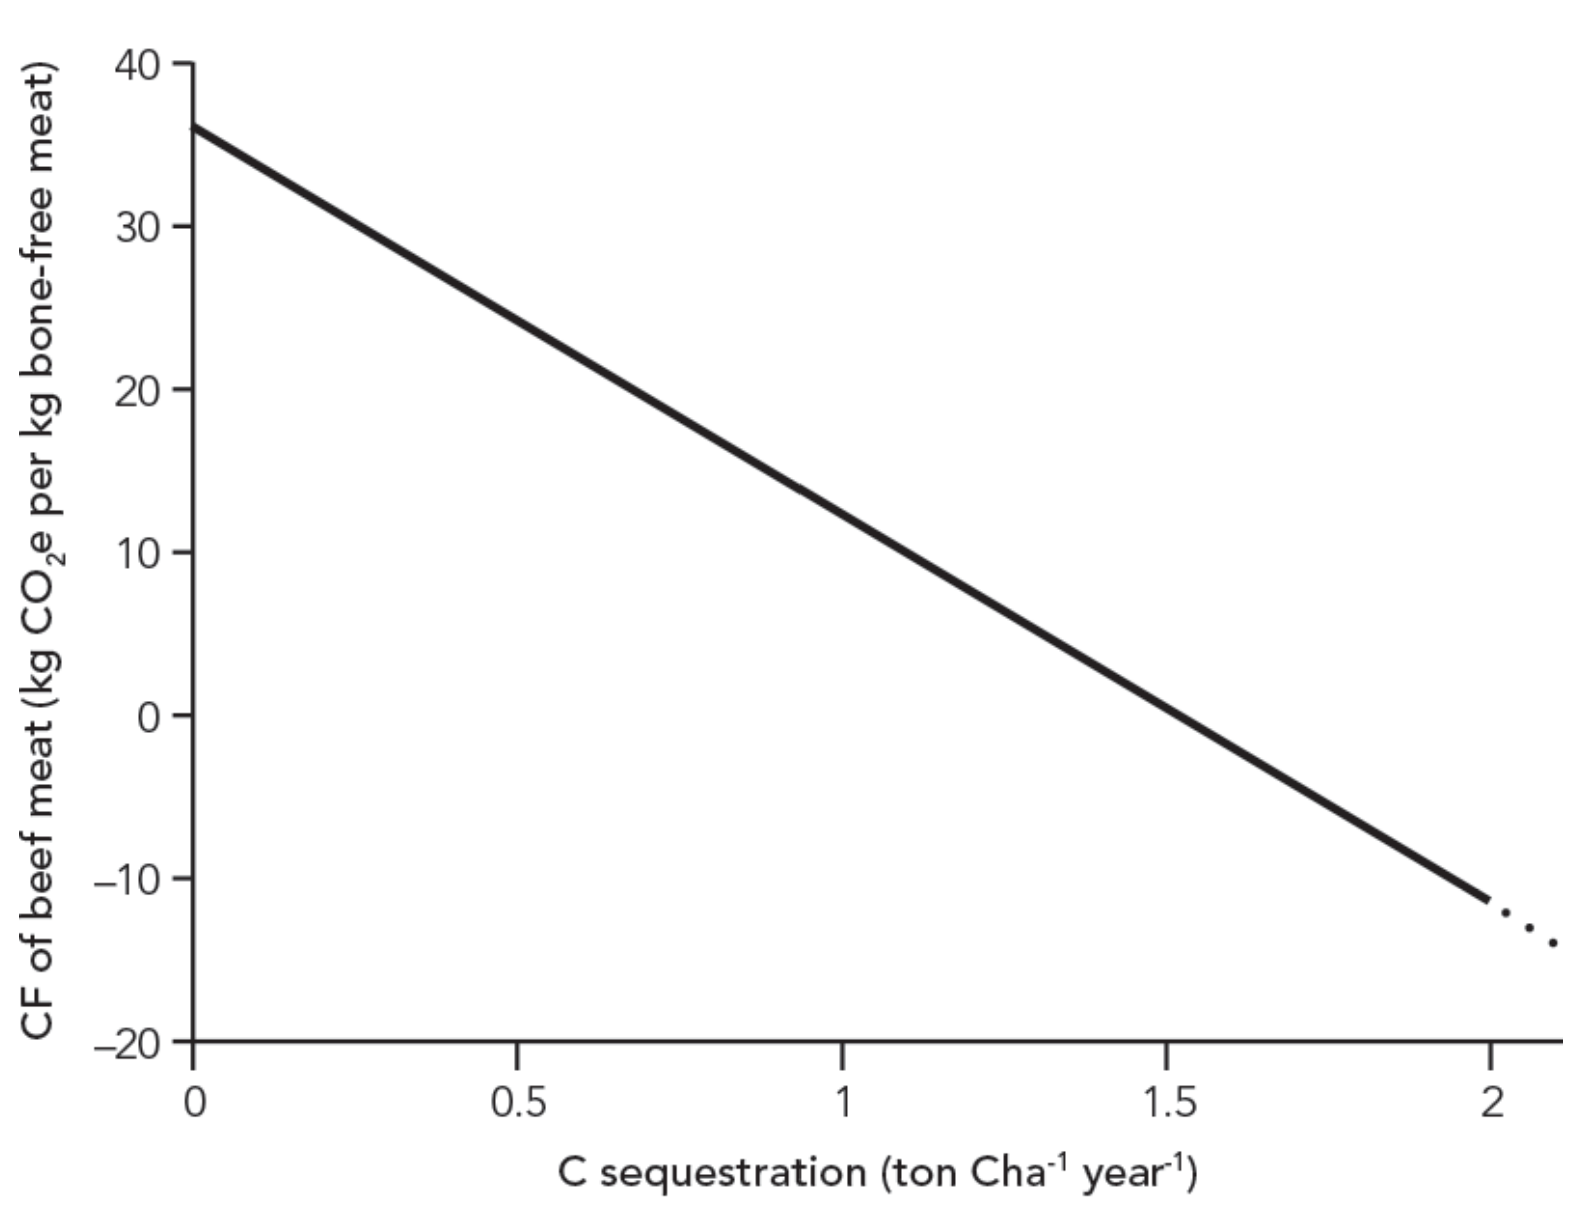 Figure 9: Theoretical relationship between carbon footprint of meat and level of carbon sequestration. 